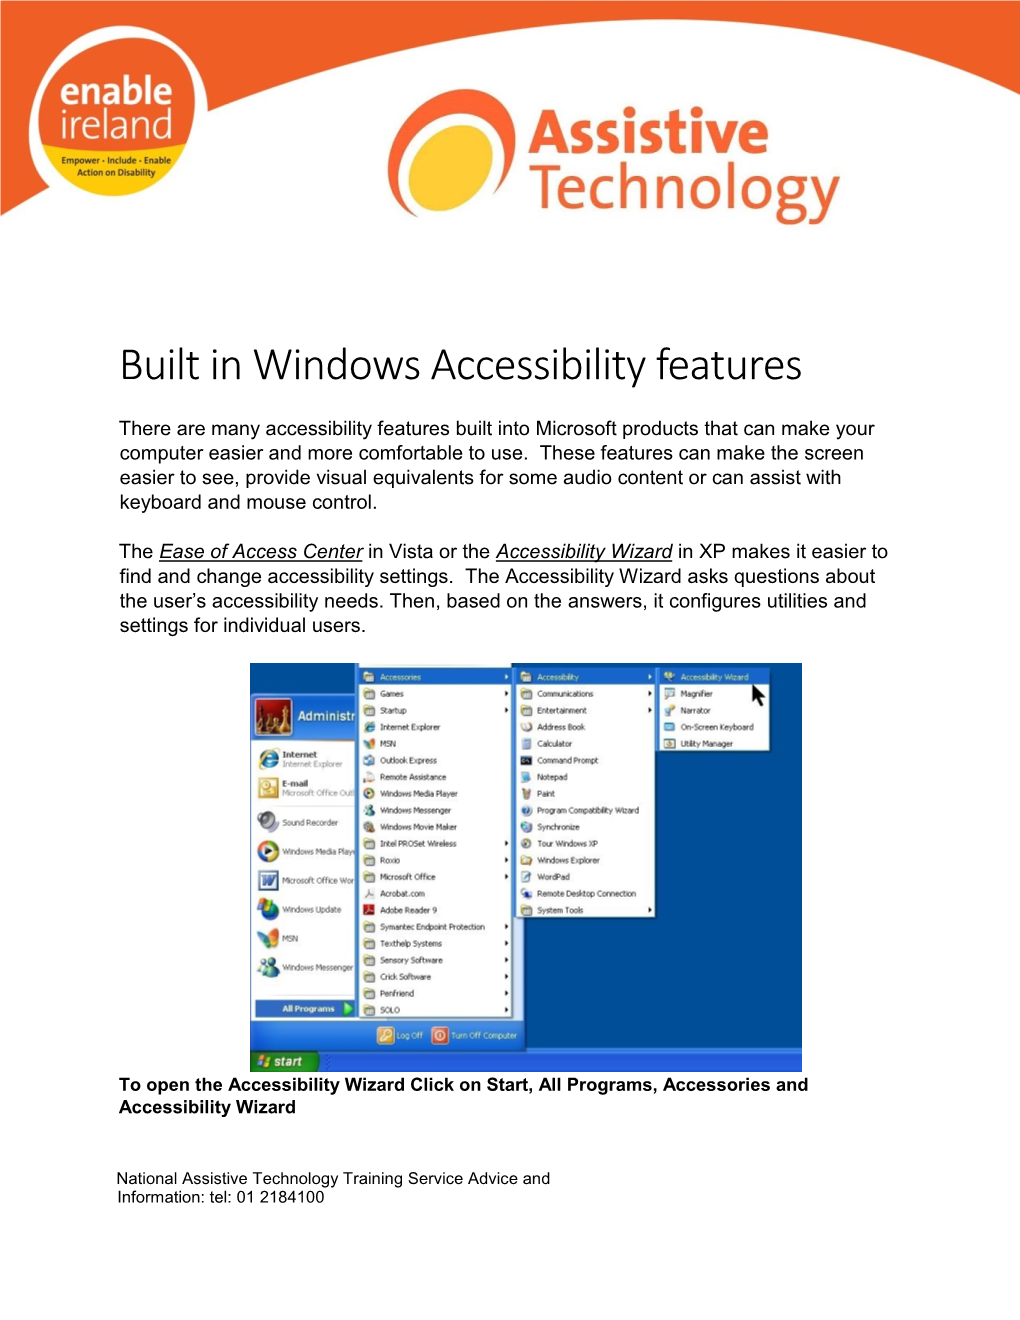 Build in Windows Accessibility Features